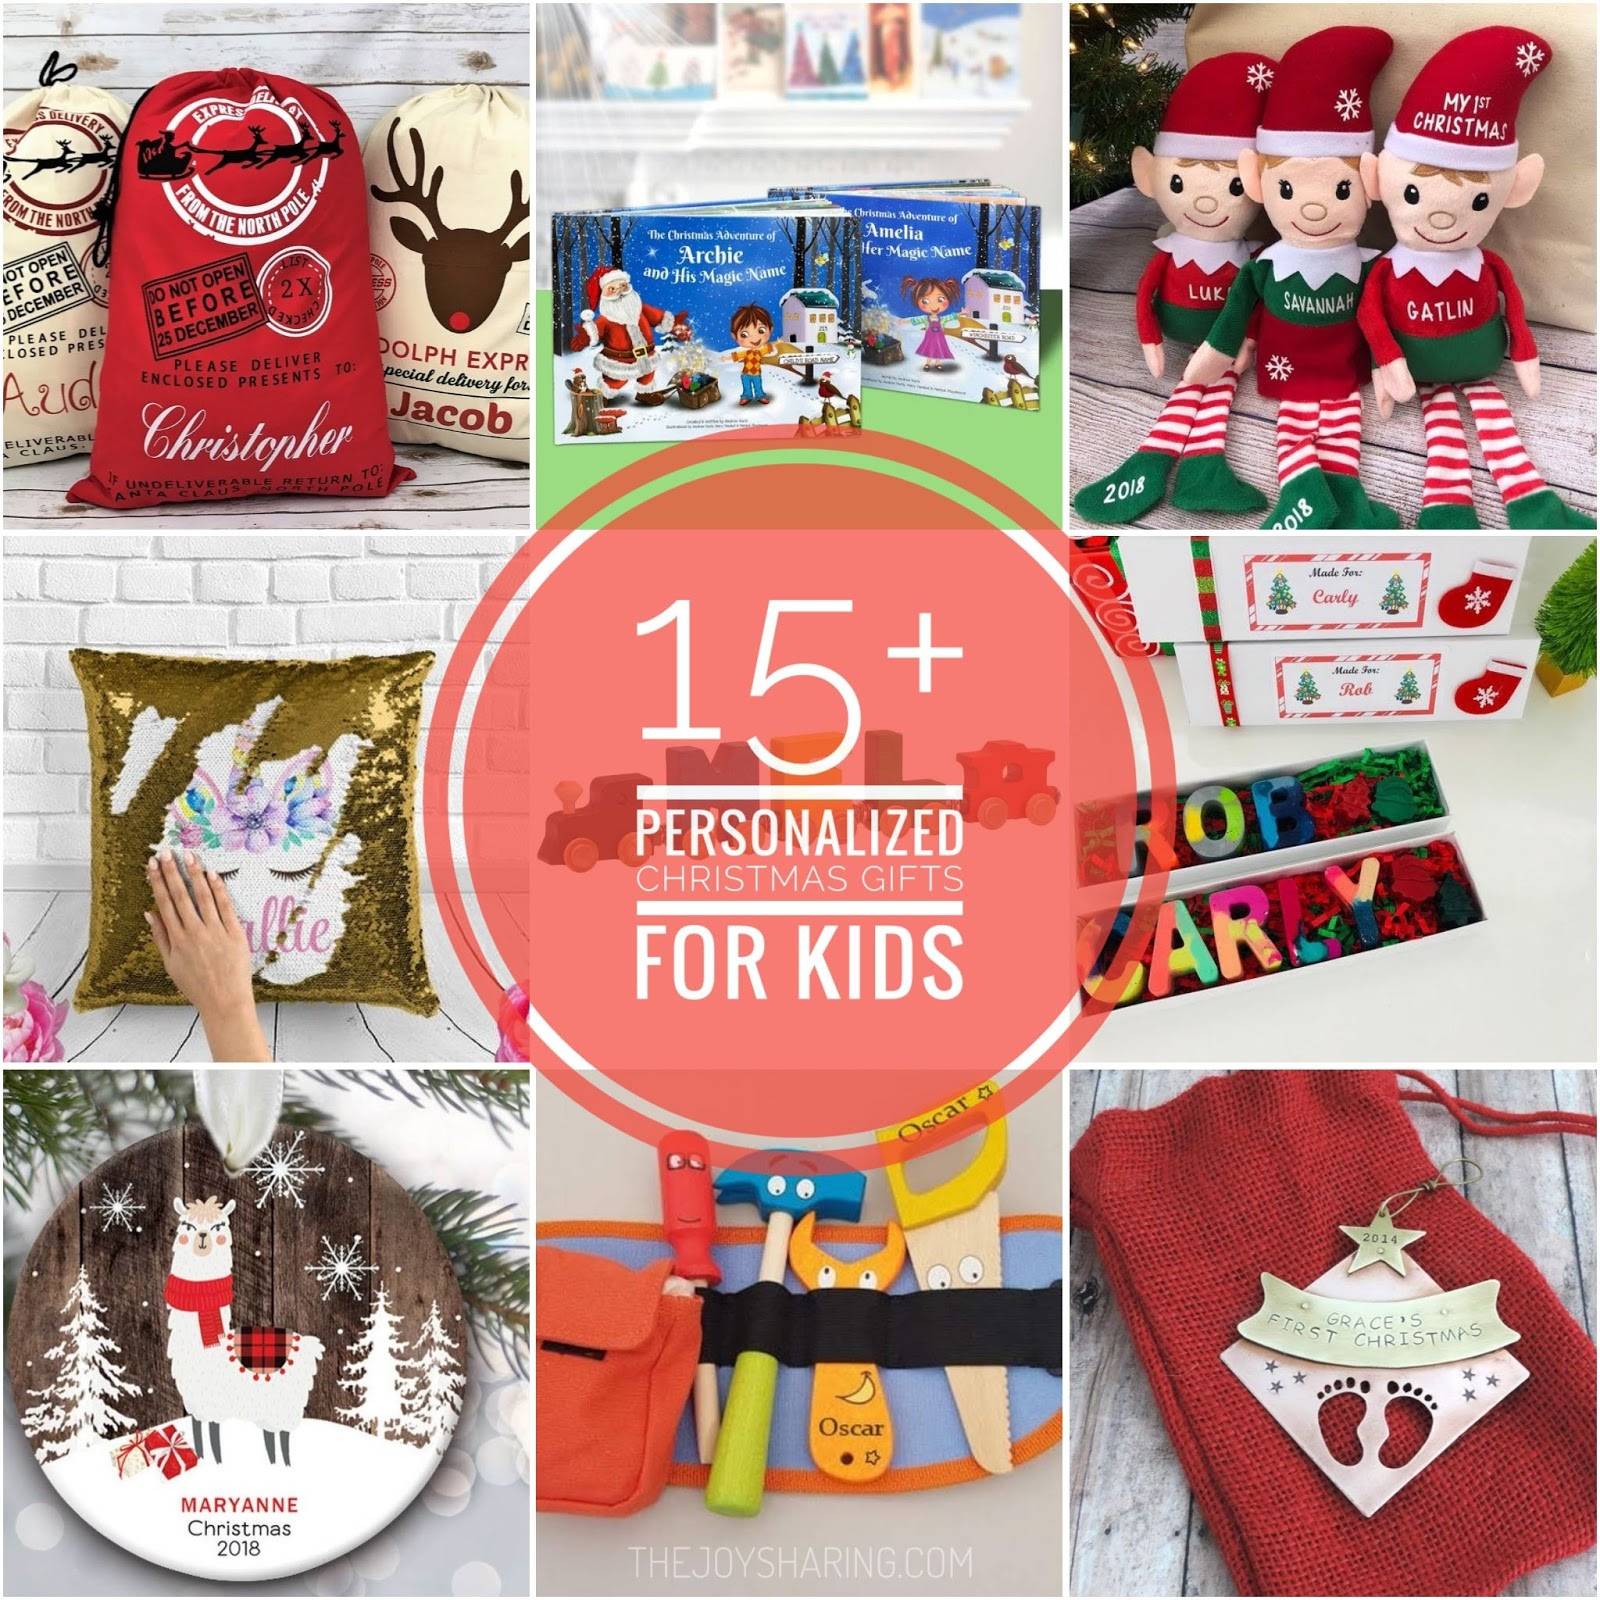 Personalized Children Gifts
 15 Personalized Christmas Gifts for Kids The Joy of Sharing